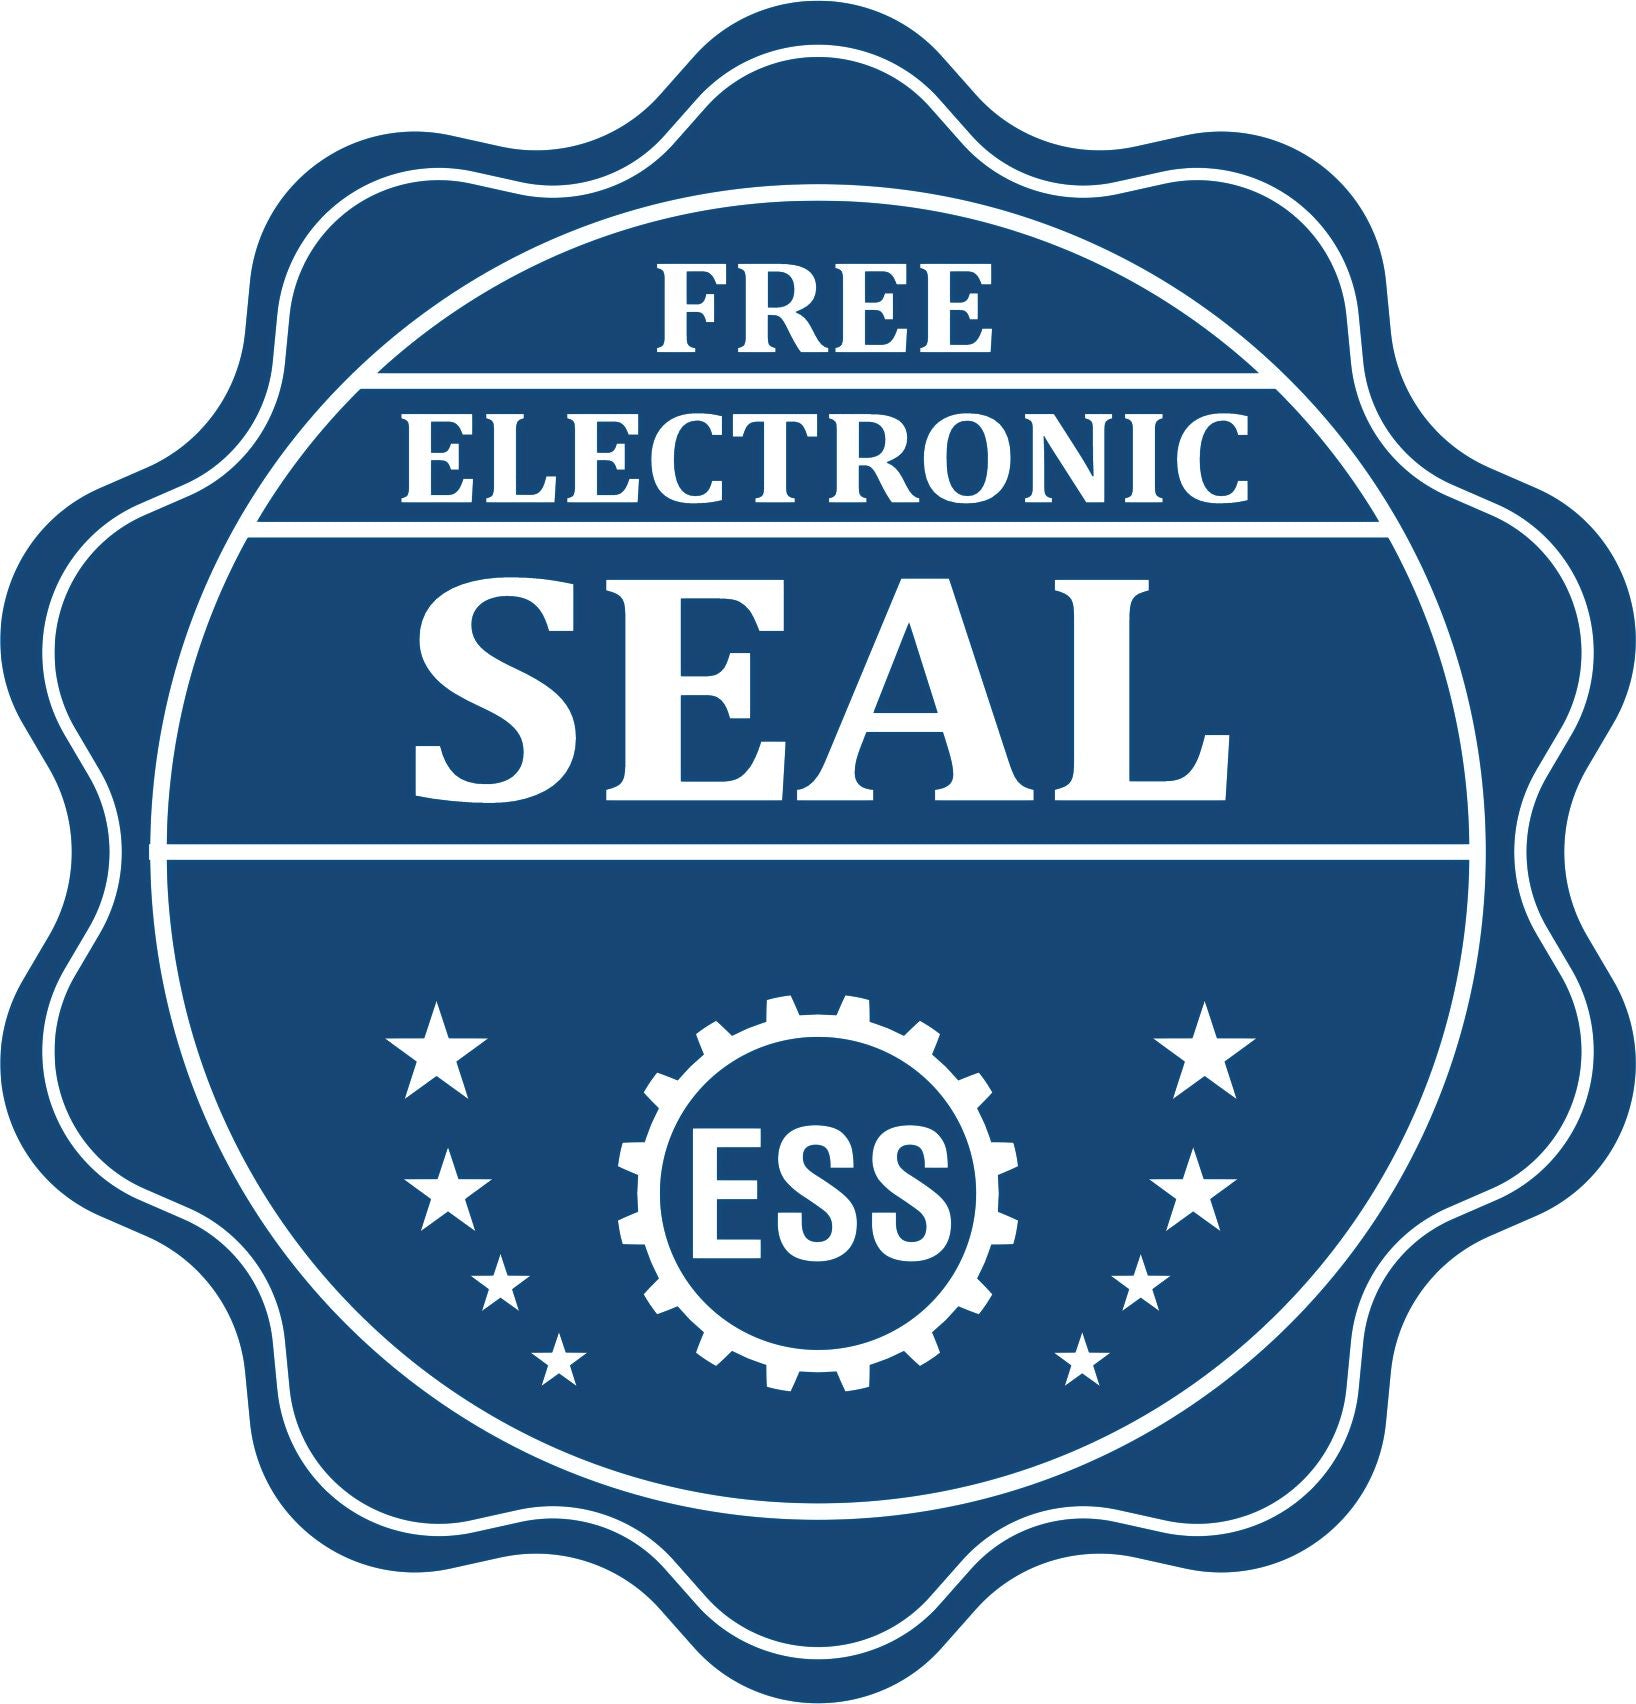 A badge showing a free electronic seal for the Alabama Professional Engineer Seal Stamp with stars and the ESS gear on the emblem.